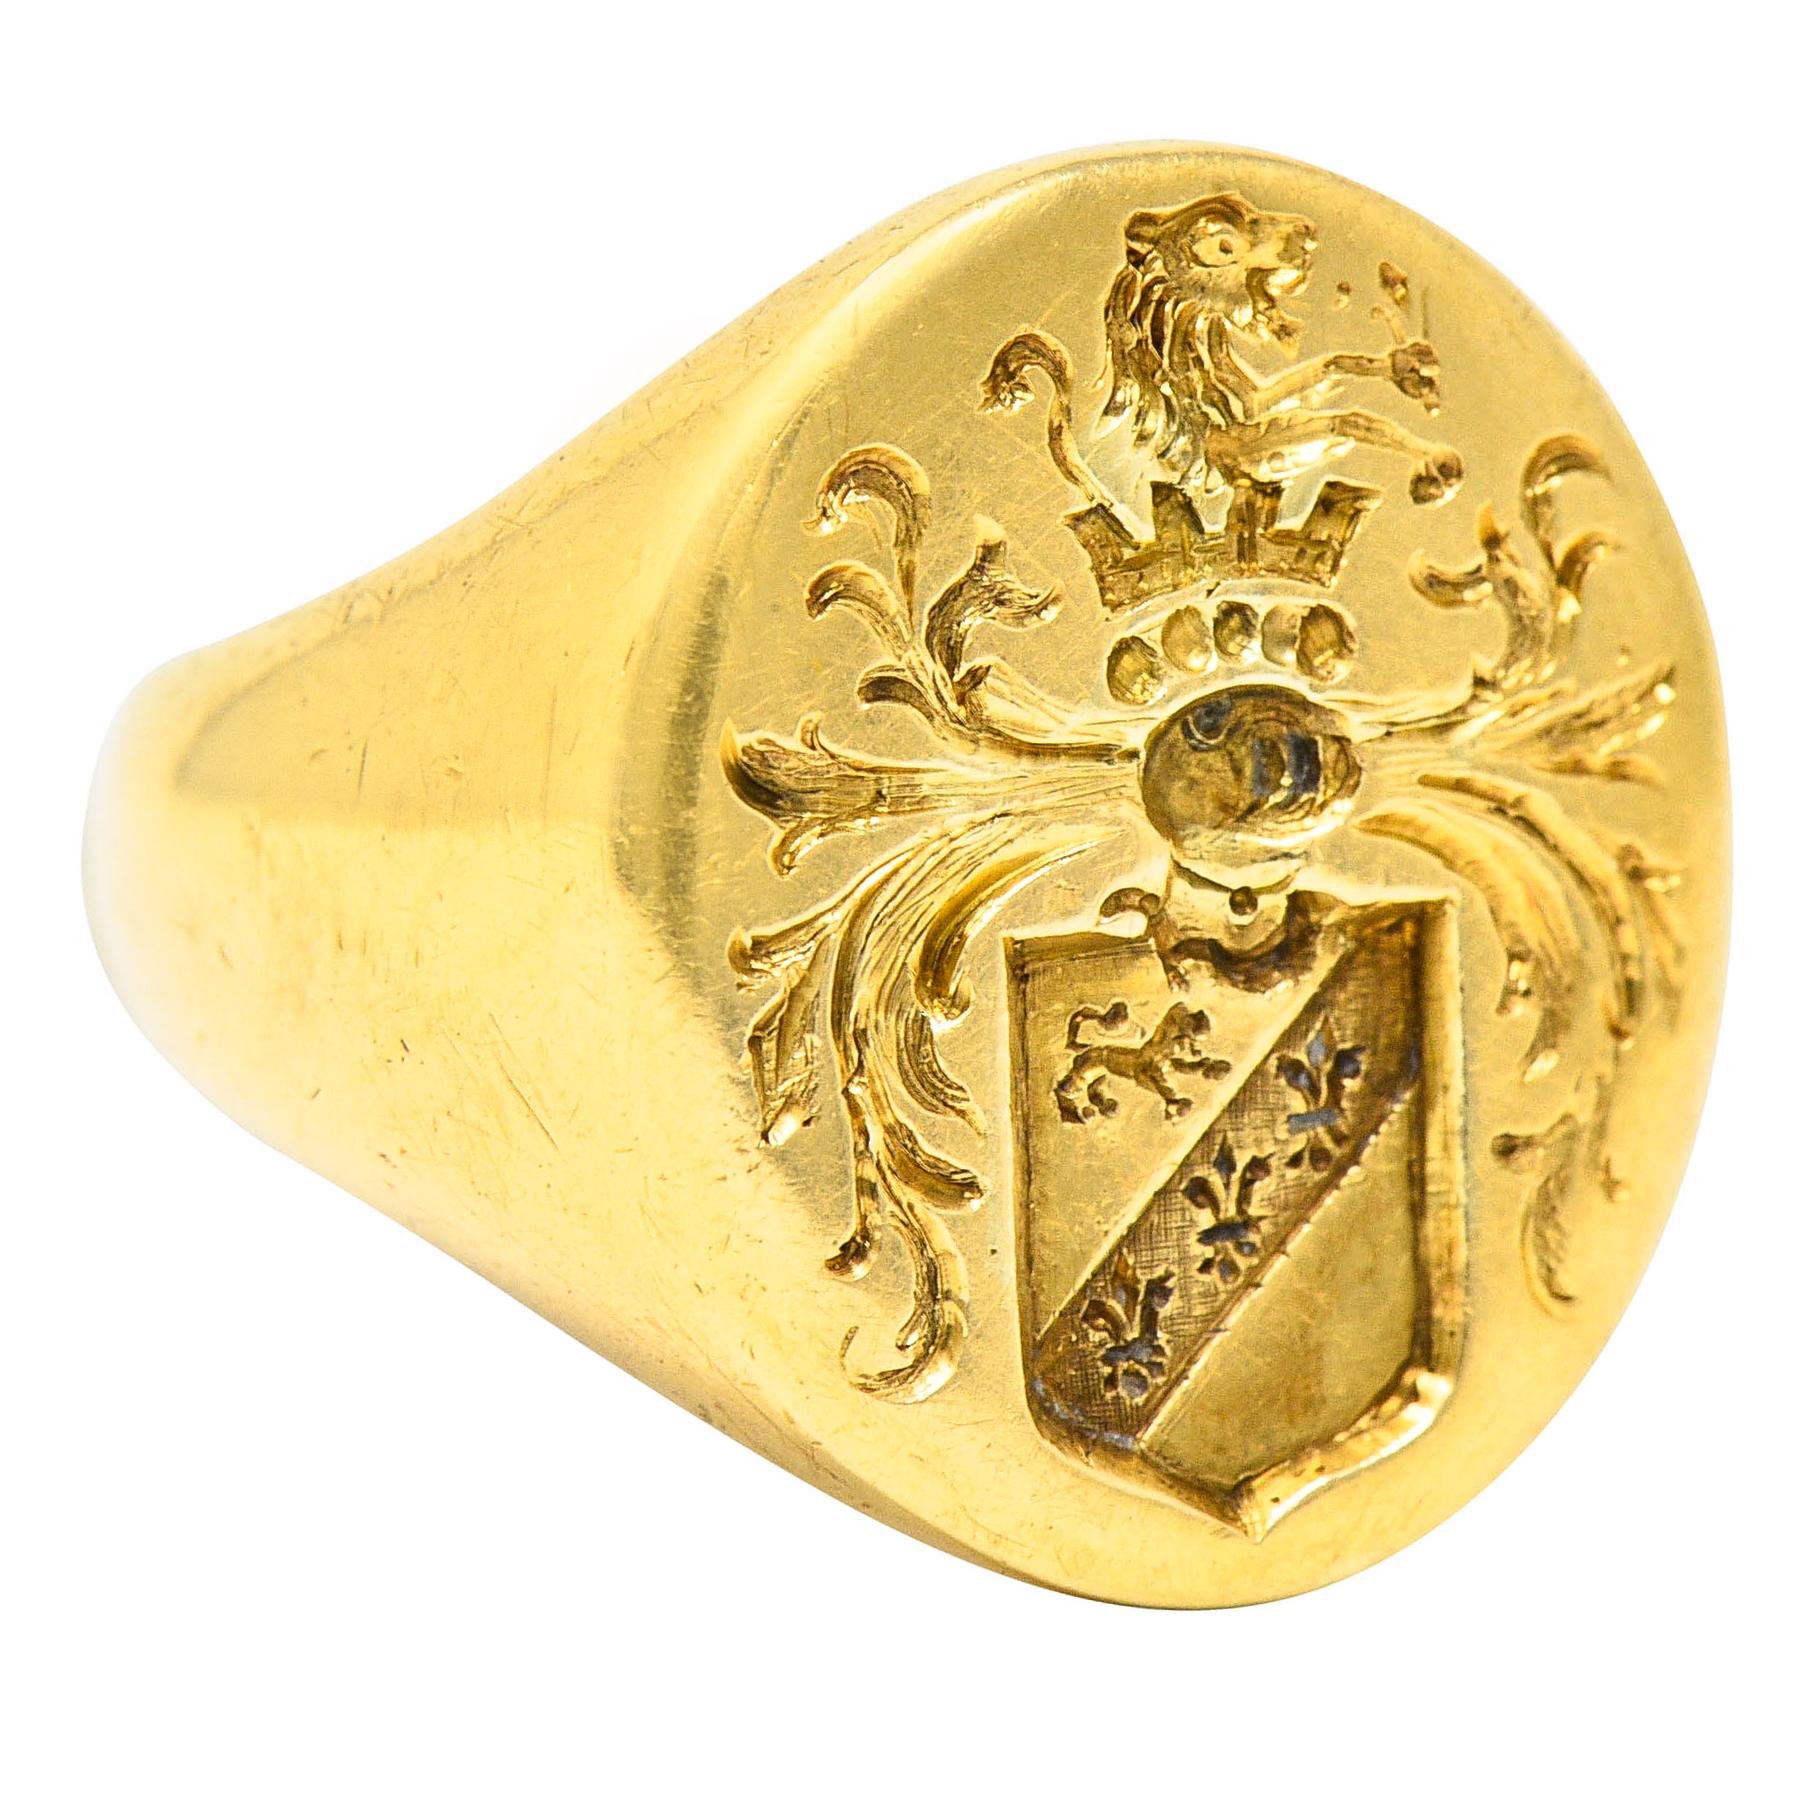 Signet style ring with an oval face

Deeply engraved to depict a shield with lion and surrounded by whiplash

Topped by a standing roaring lion and crown motif

Marked 14k for 14 karat gold and with inner inscription

Circa: 1940

Ring Size: 6